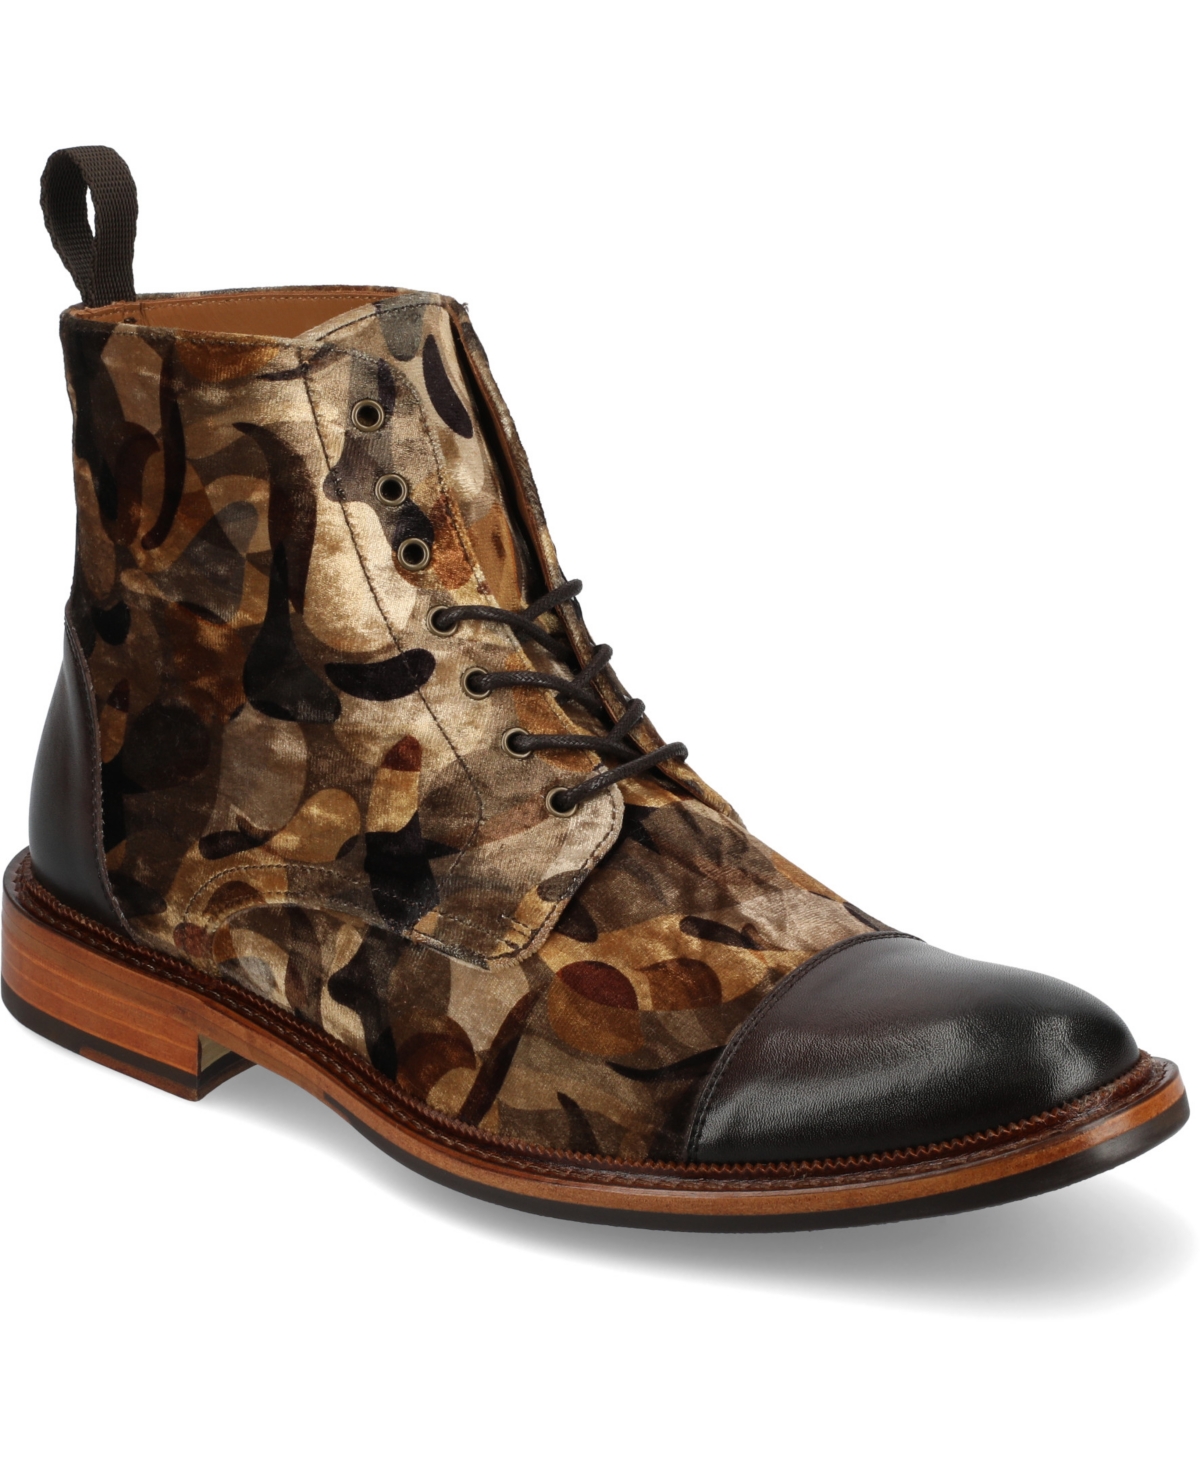 Men's The Jack Cap-Toe Boot - Abstract